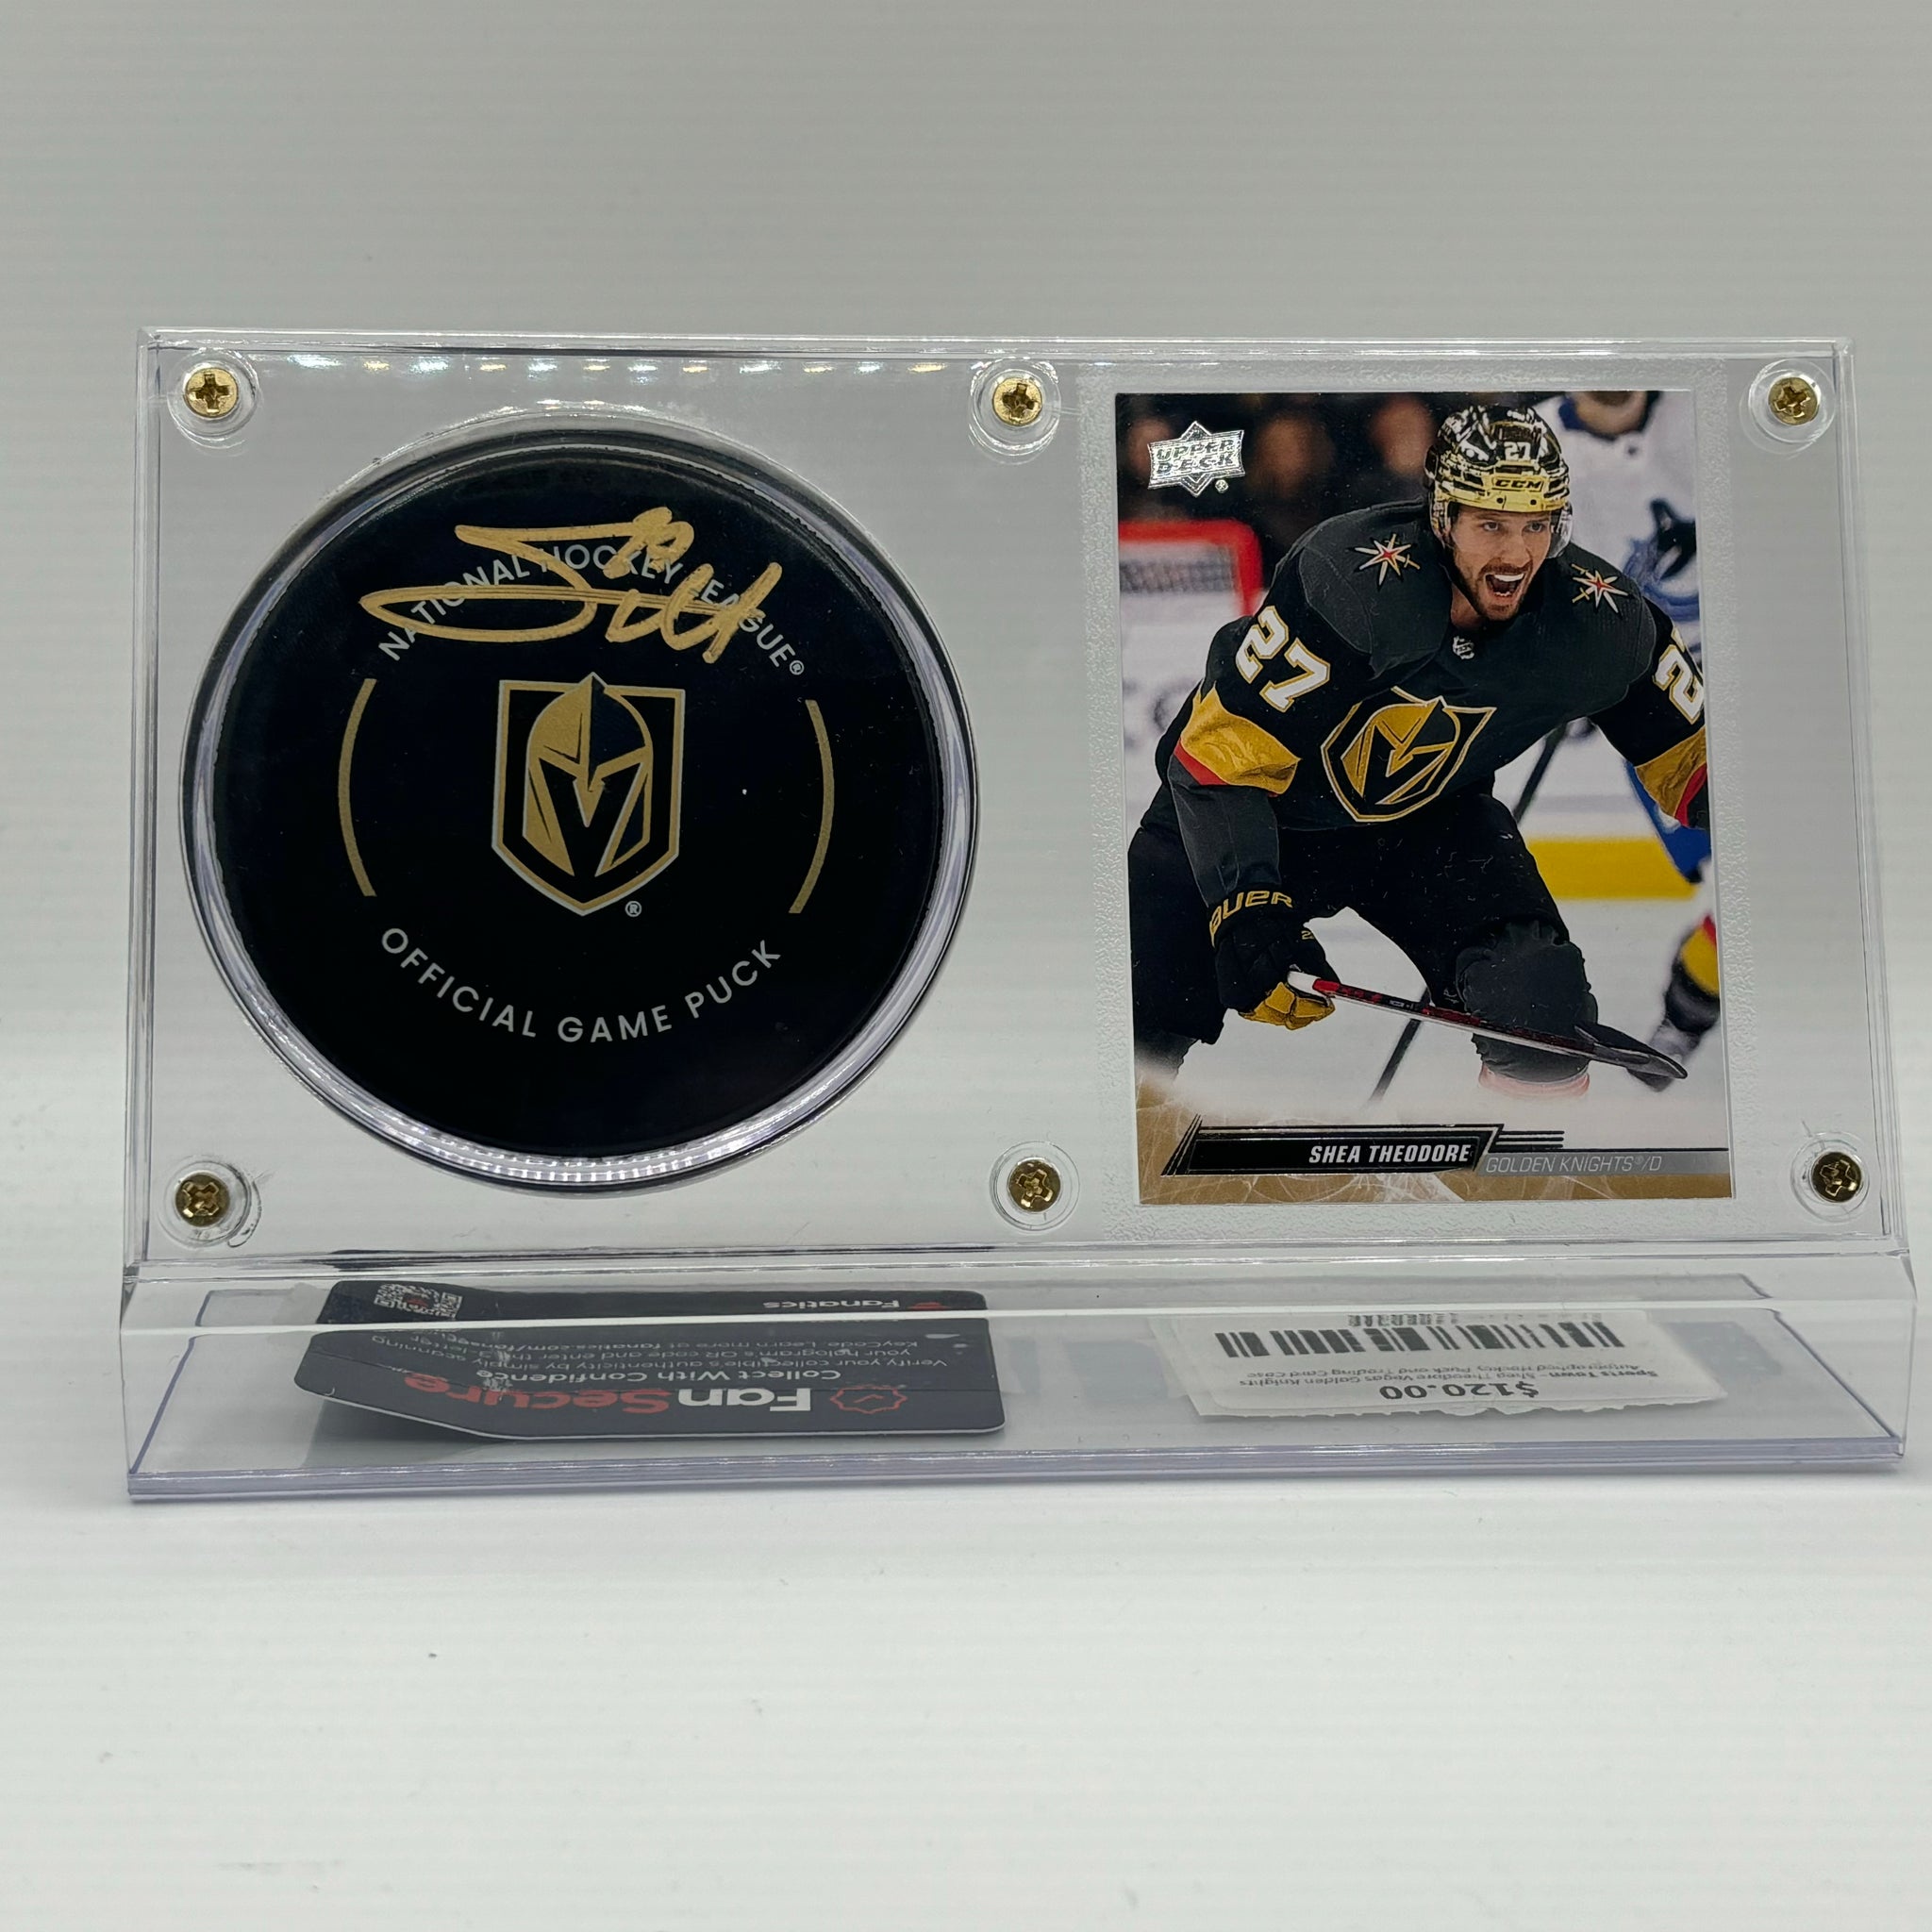 Shea Theodore Vegas Golden Knights Autographed Hockey Puck and Trading Card Case